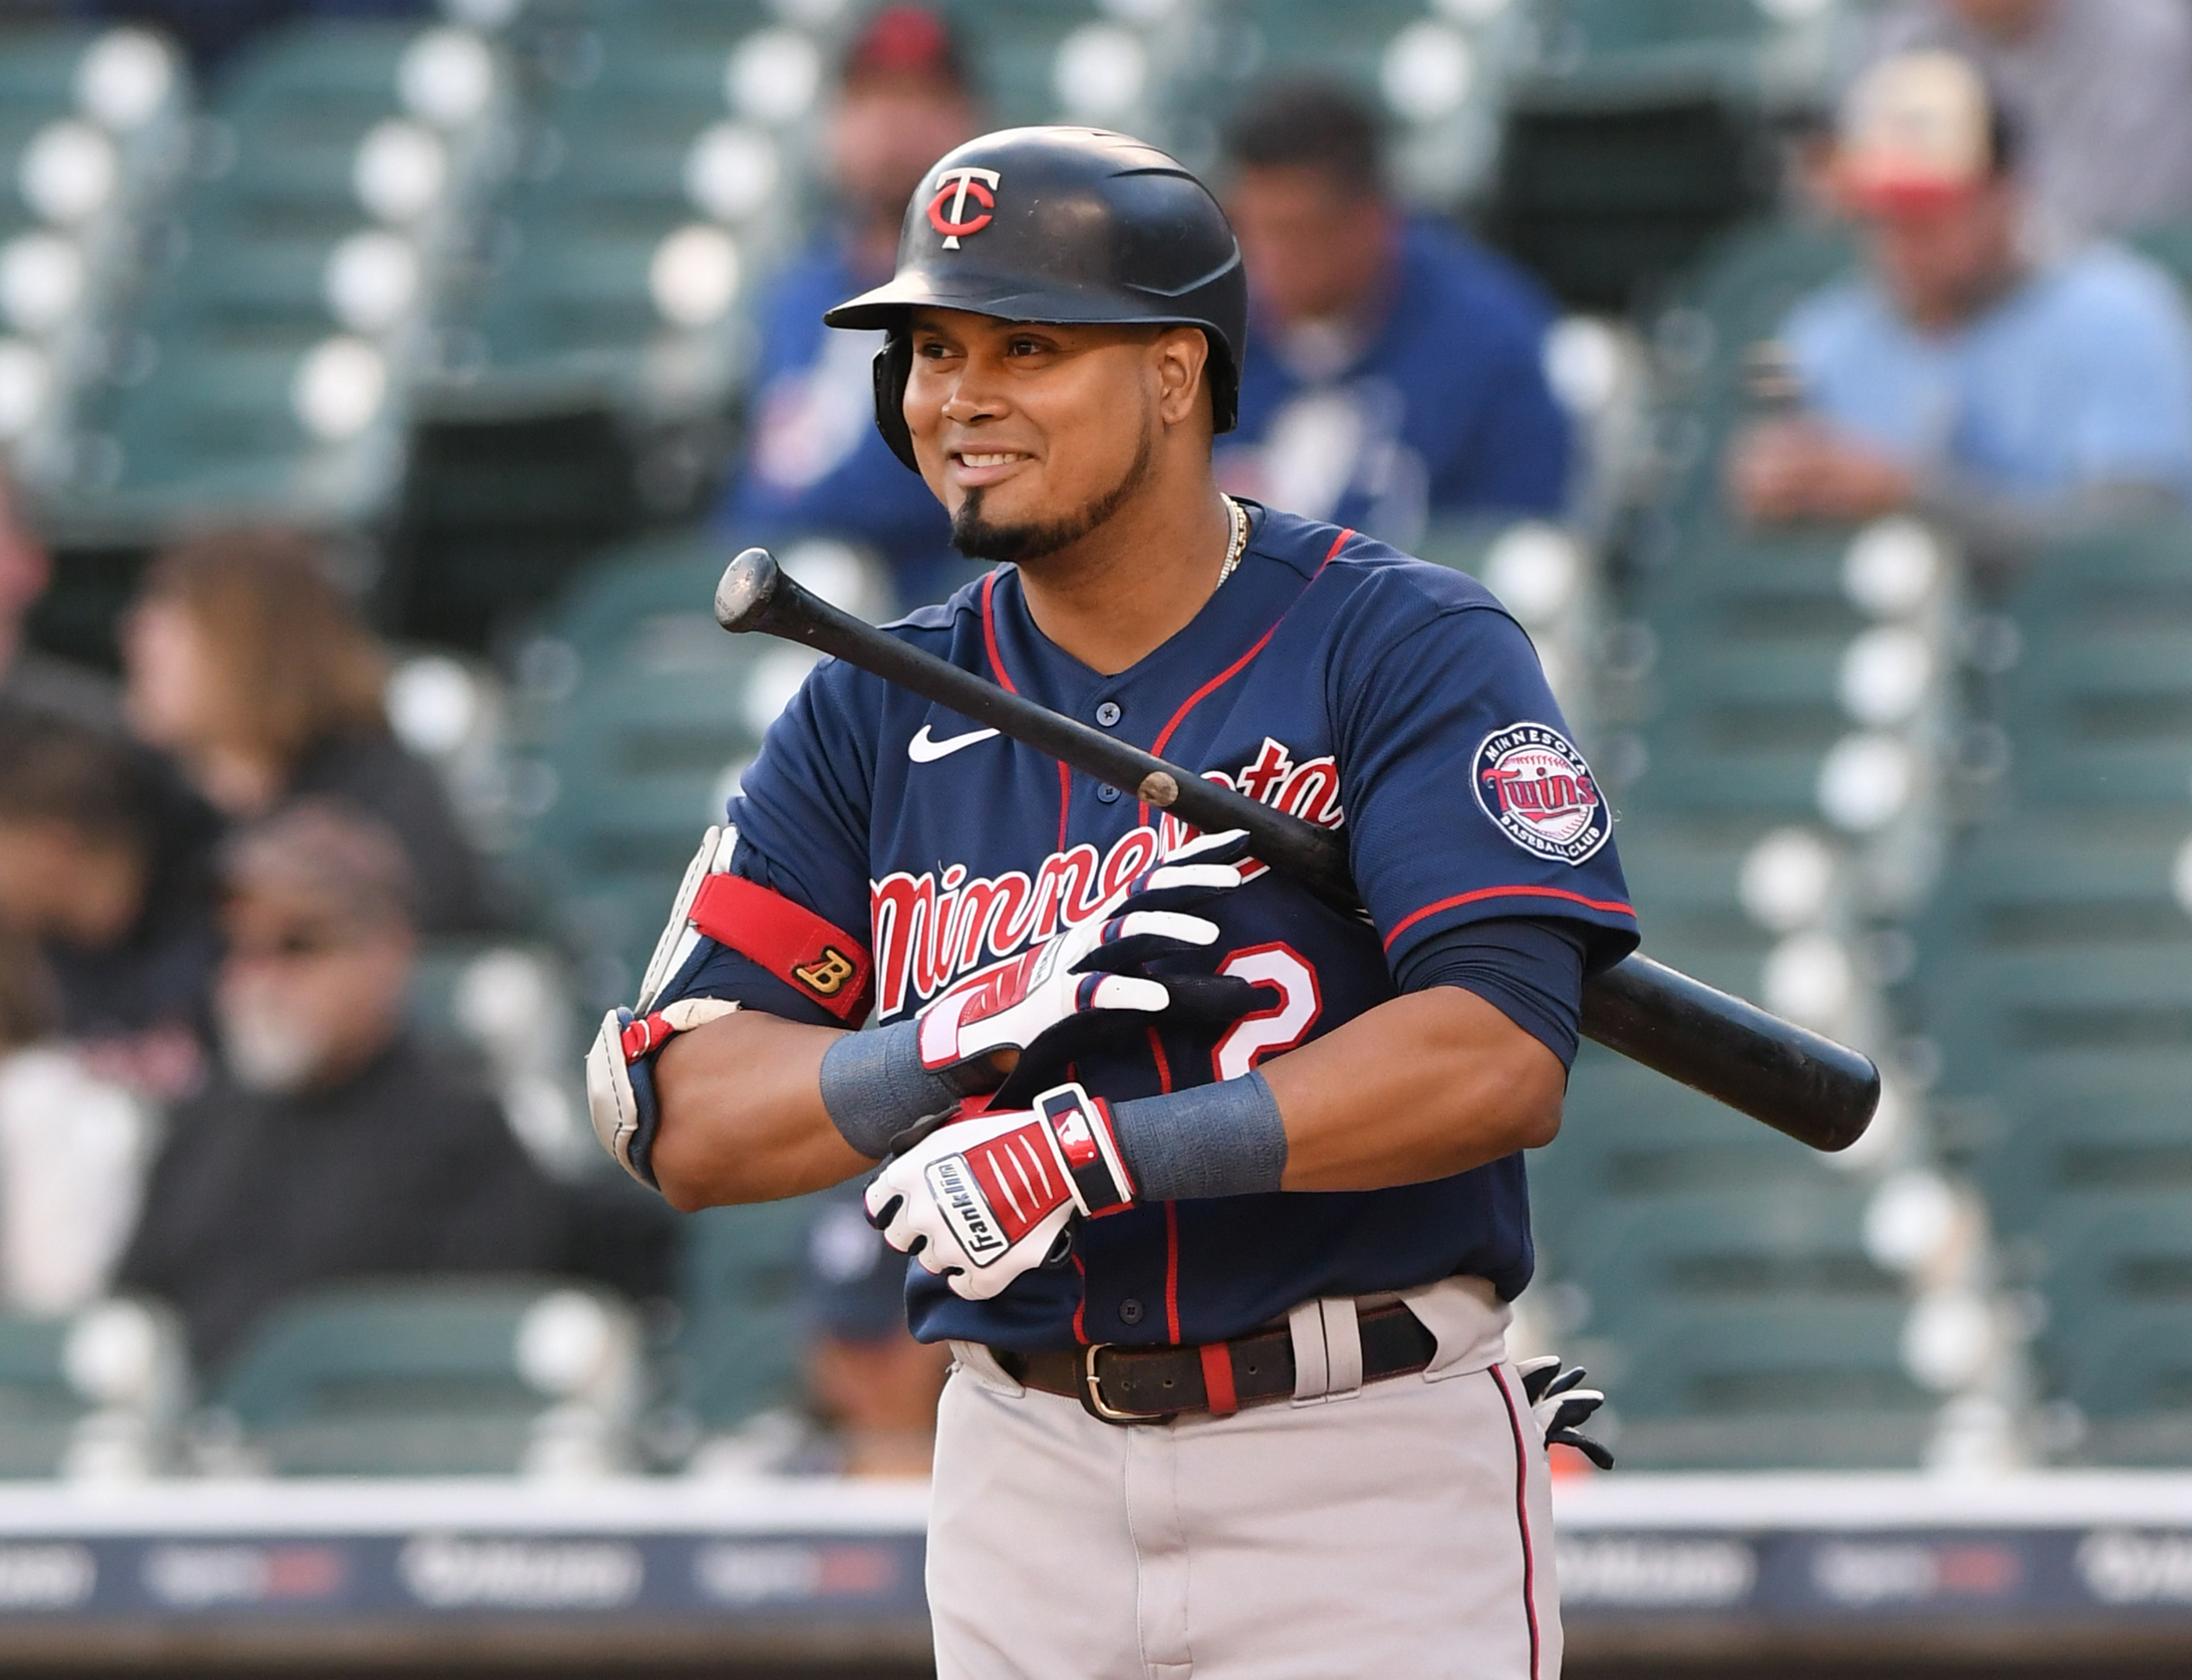 Luis Arraez #2 of the Minnesota Twins looks on while batting during the game against the Detroit Tigers at Comerica Park on October 1, 2022 in Detroit, Michigan. The Tigers defeated the Twins 3-2.